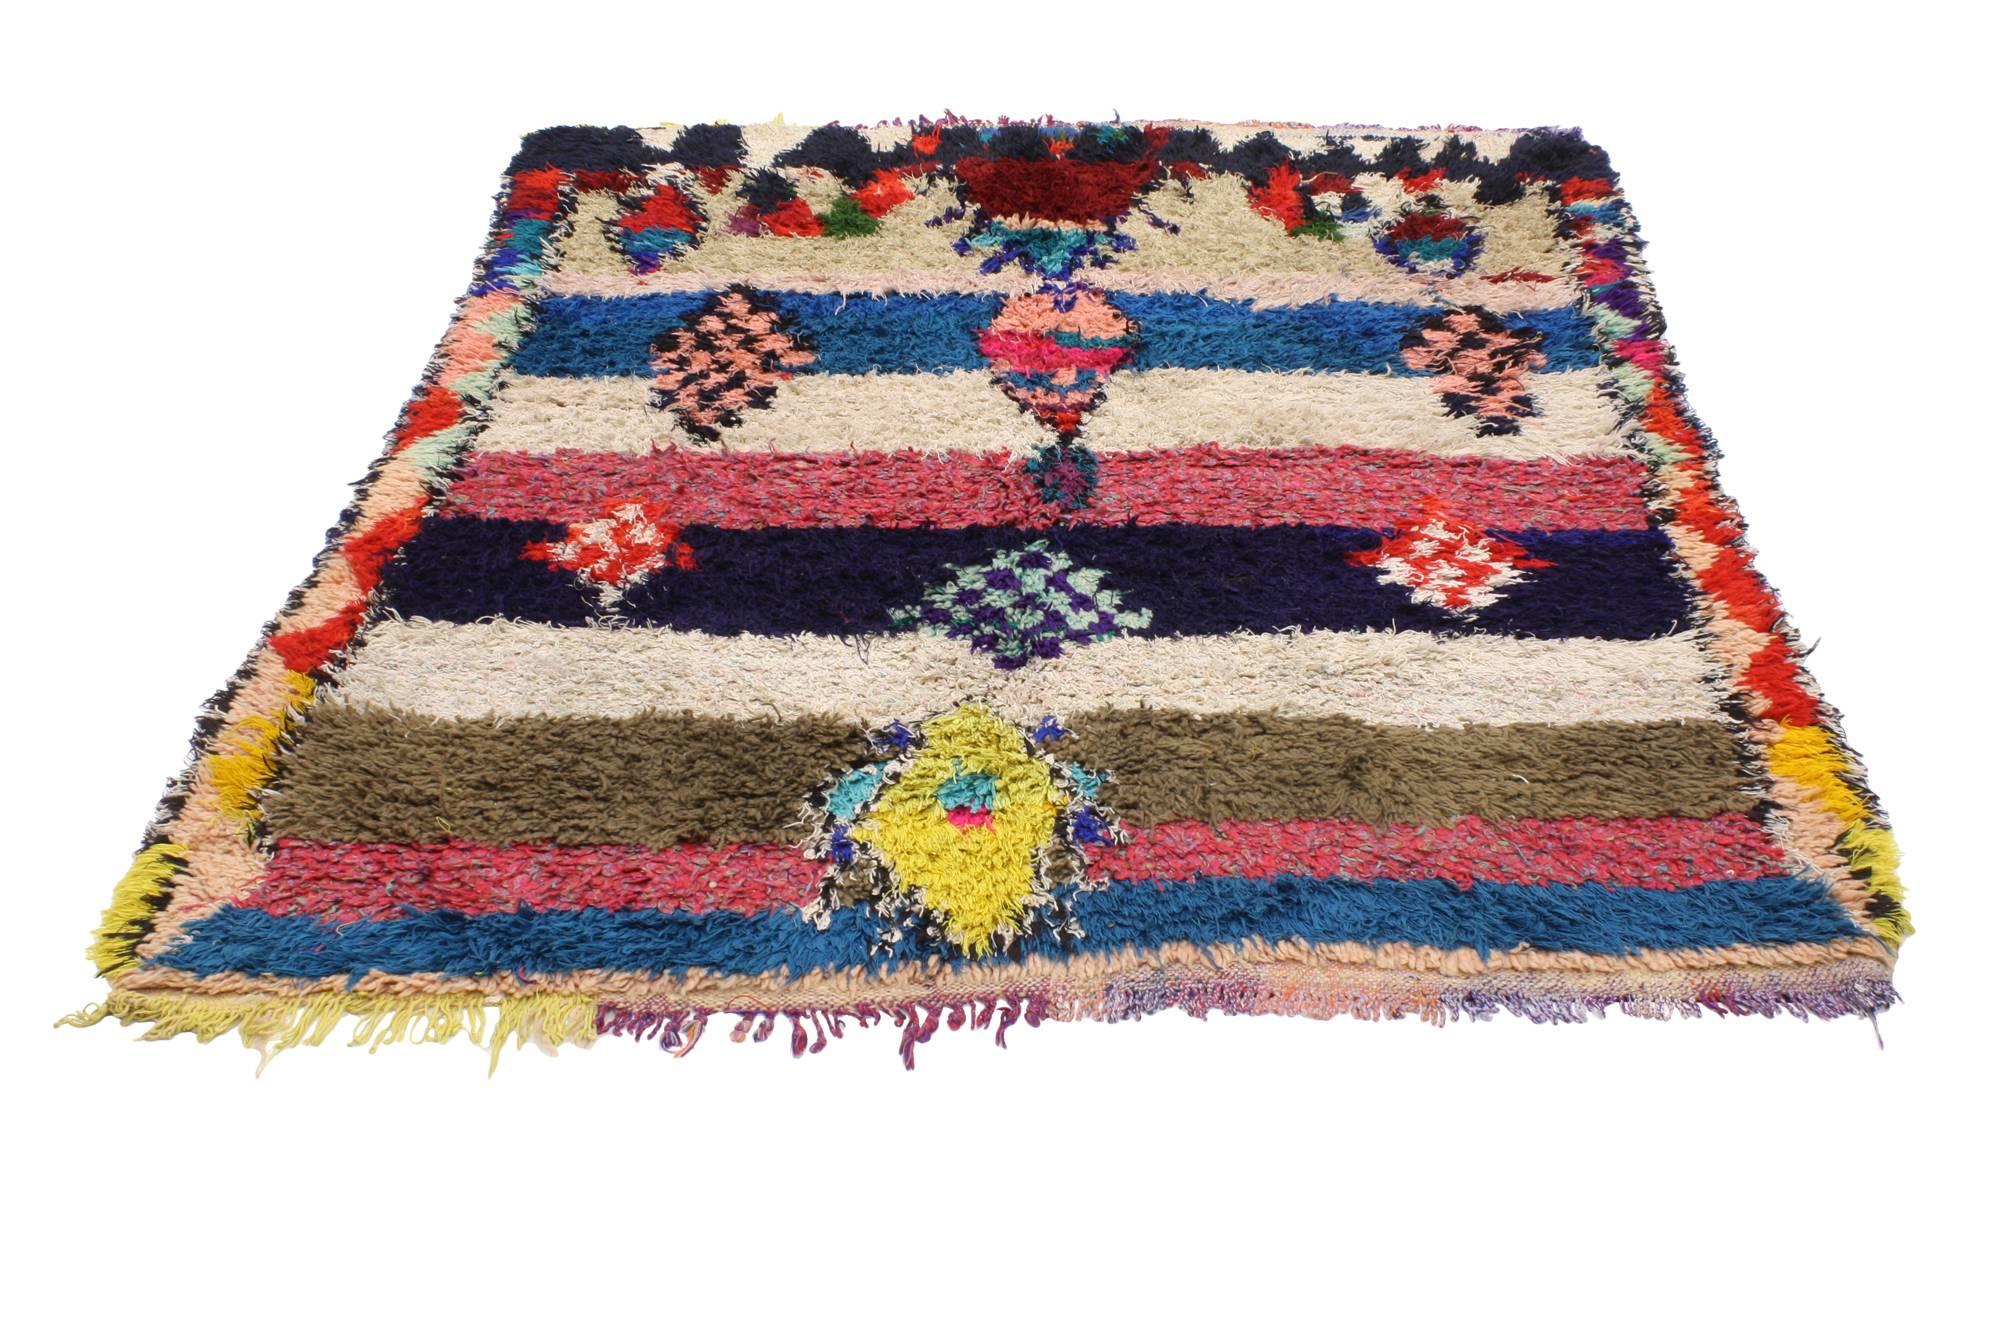 20485, vintage Berber Moroccan Boucherouite rug. Stark shades of the colors woven into this piece work together to create a contemporary abstract look. The variegated color pattern conjures the tribal feeling of Moroccan spirit in this Vintage